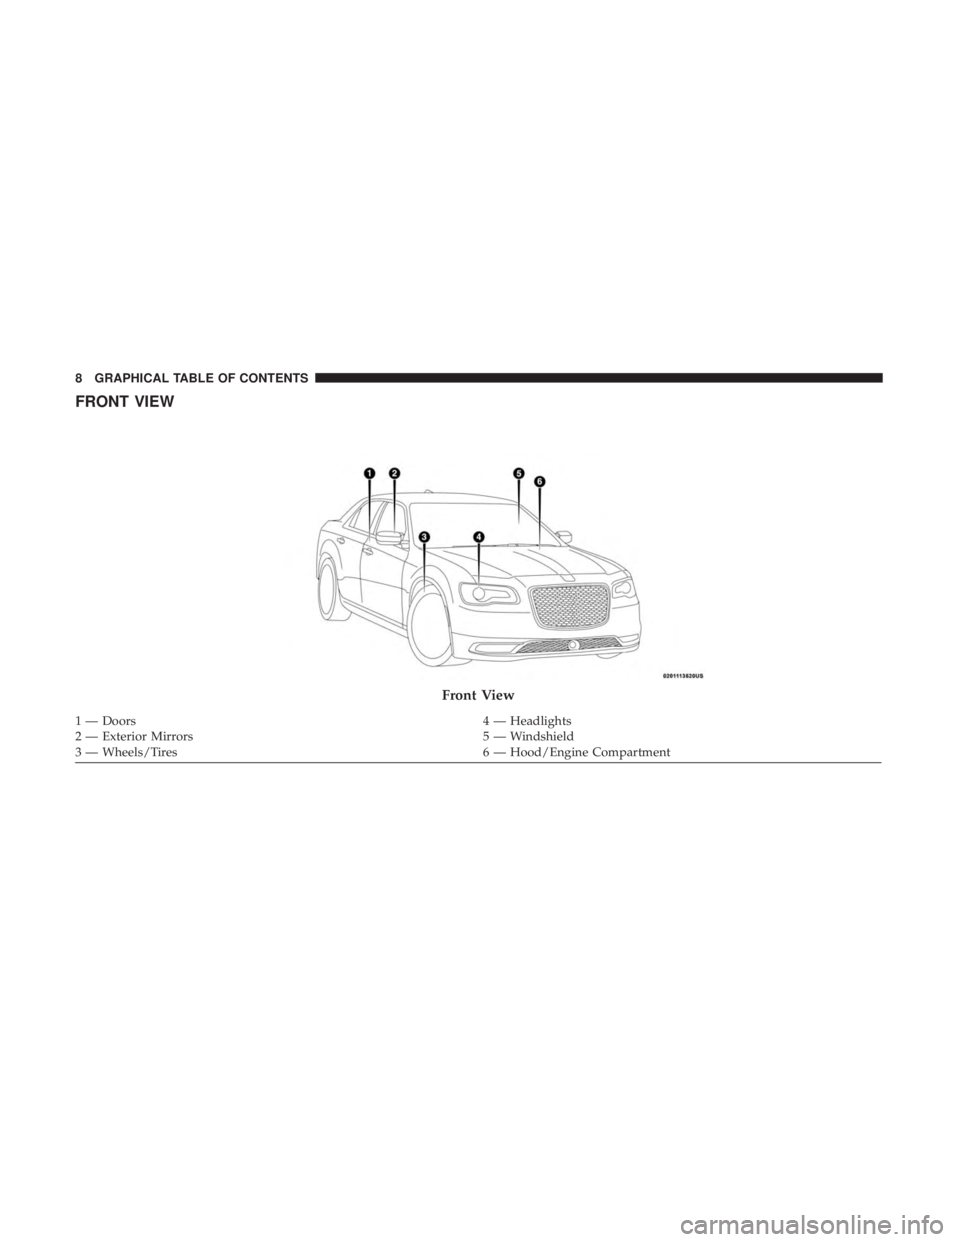 CHRYSLER 300 2019  Owners Manual FRONT VIEW
Front View
1 — Doors4 — Headlights
2 — Exterior Mirrors 5 — Windshield
3 — Wheels/Tires 6 — Hood/Engine Compartment
8 GRAPHICAL TABLE OF CONTENTS 